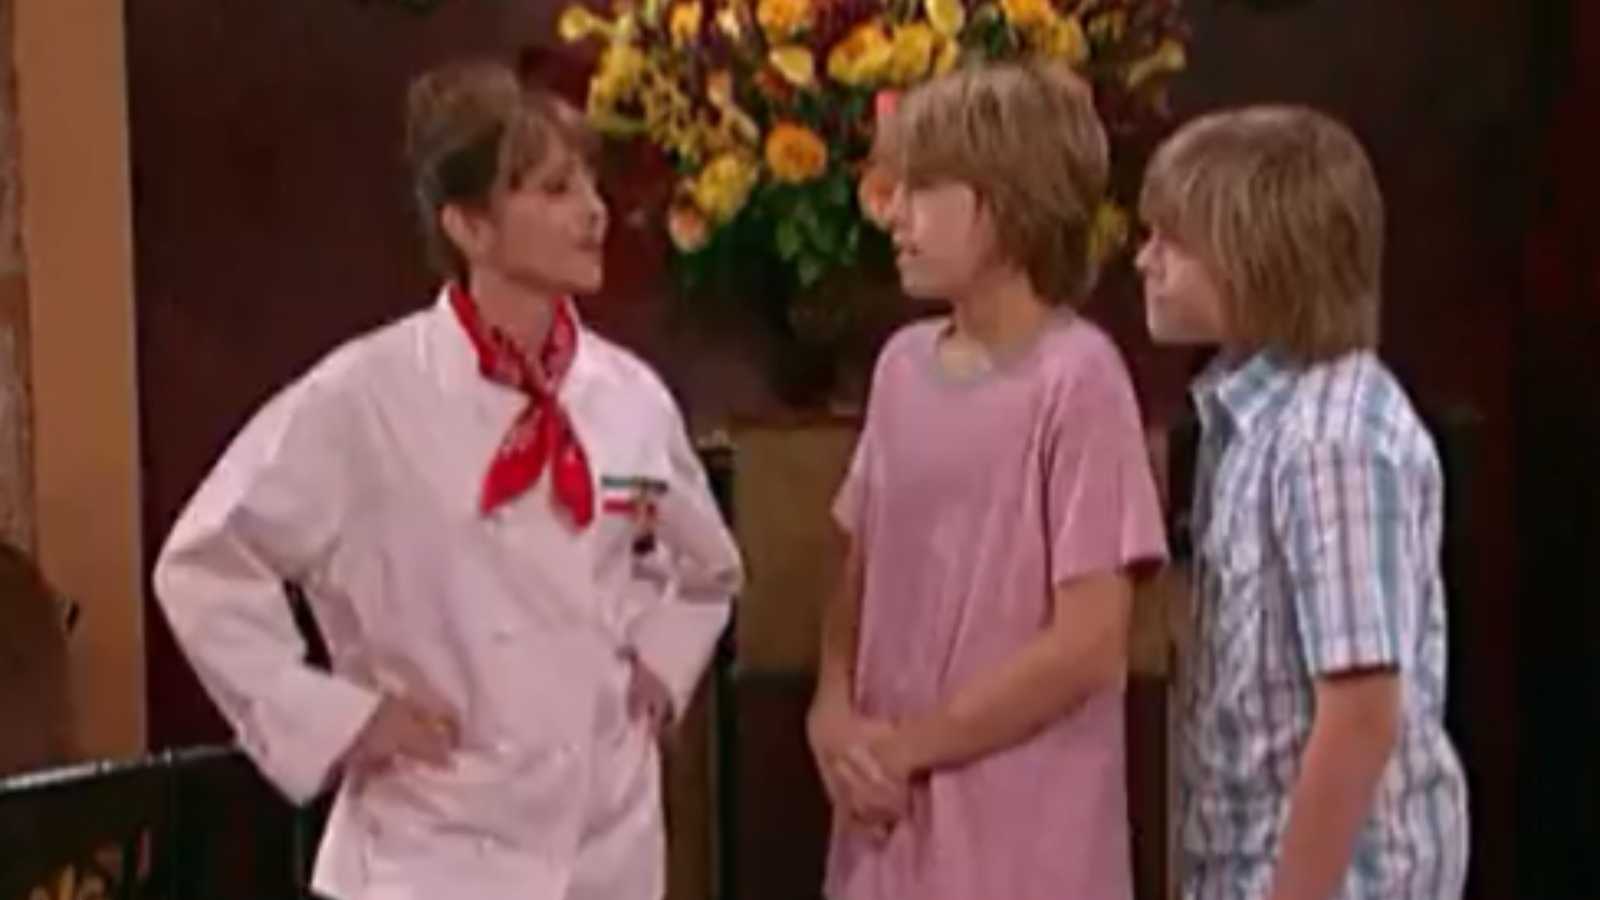 Cole Sprouse & Dylan Sprouse's Suite Life Of Zack And Cody fans remind them of their dinner reservation, here's why